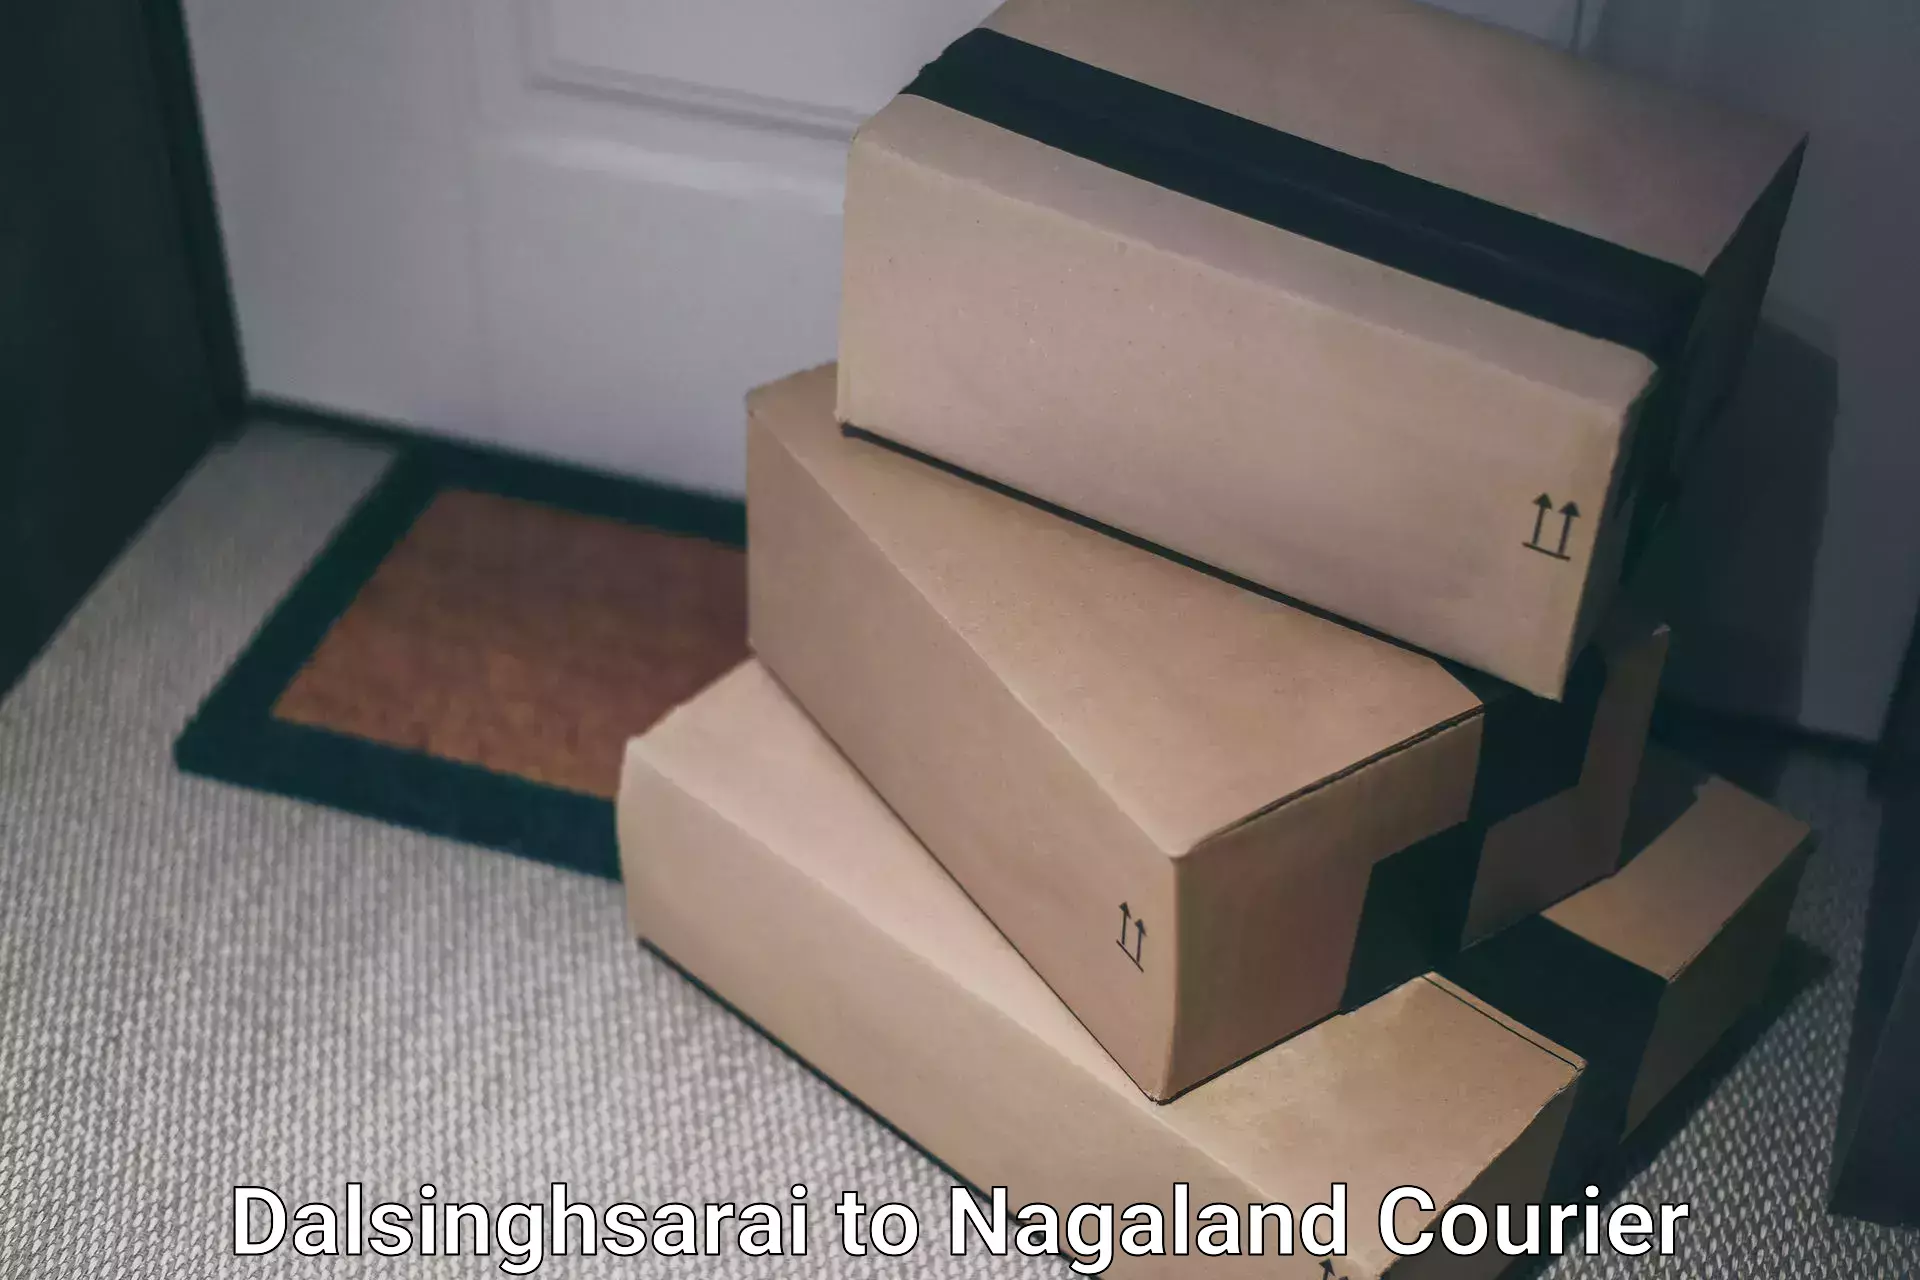 Cargo delivery service Dalsinghsarai to Nagaland